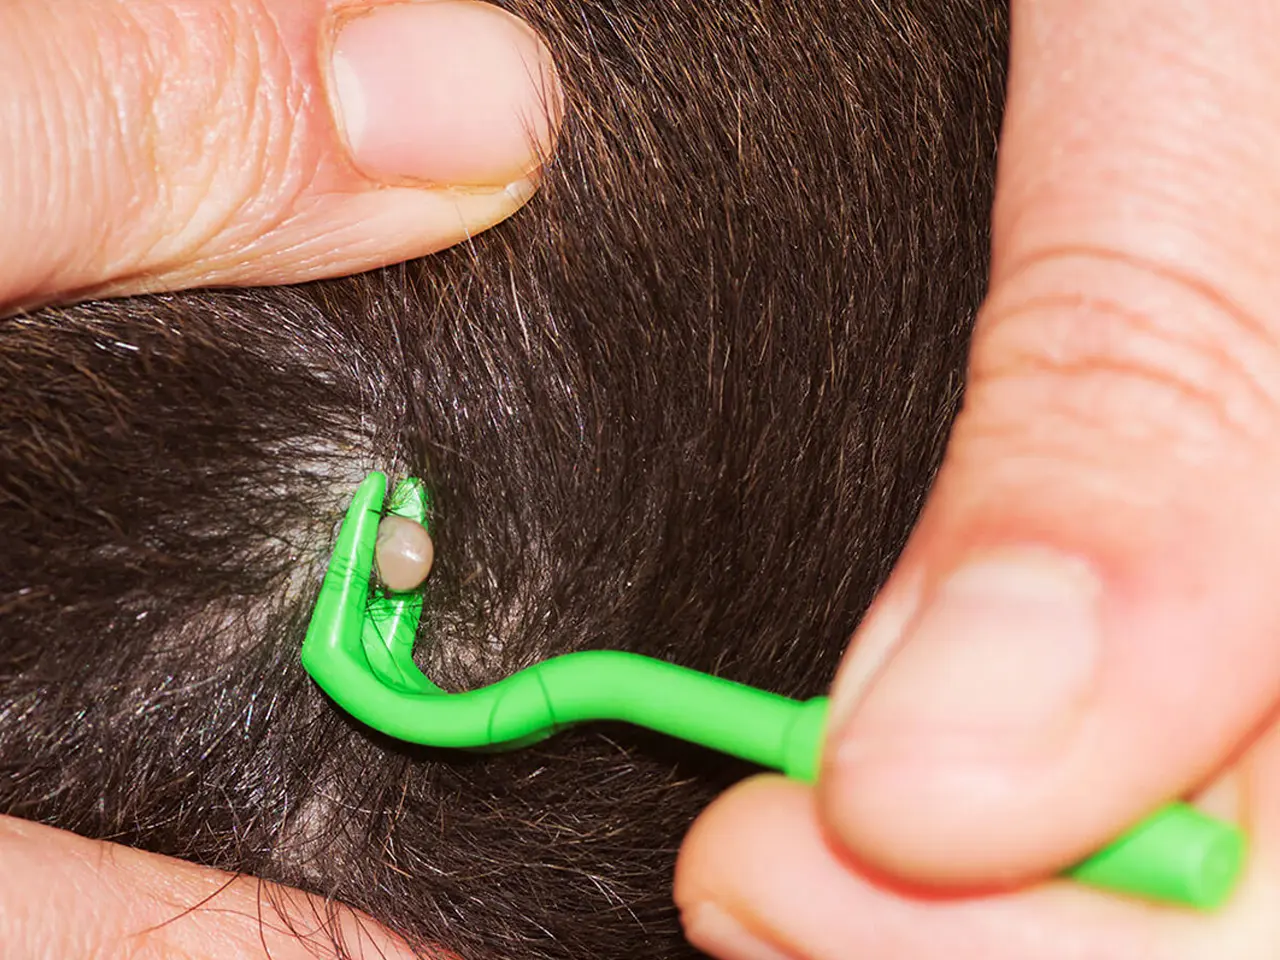 A tick being removed from a scalp using a green handheld tool